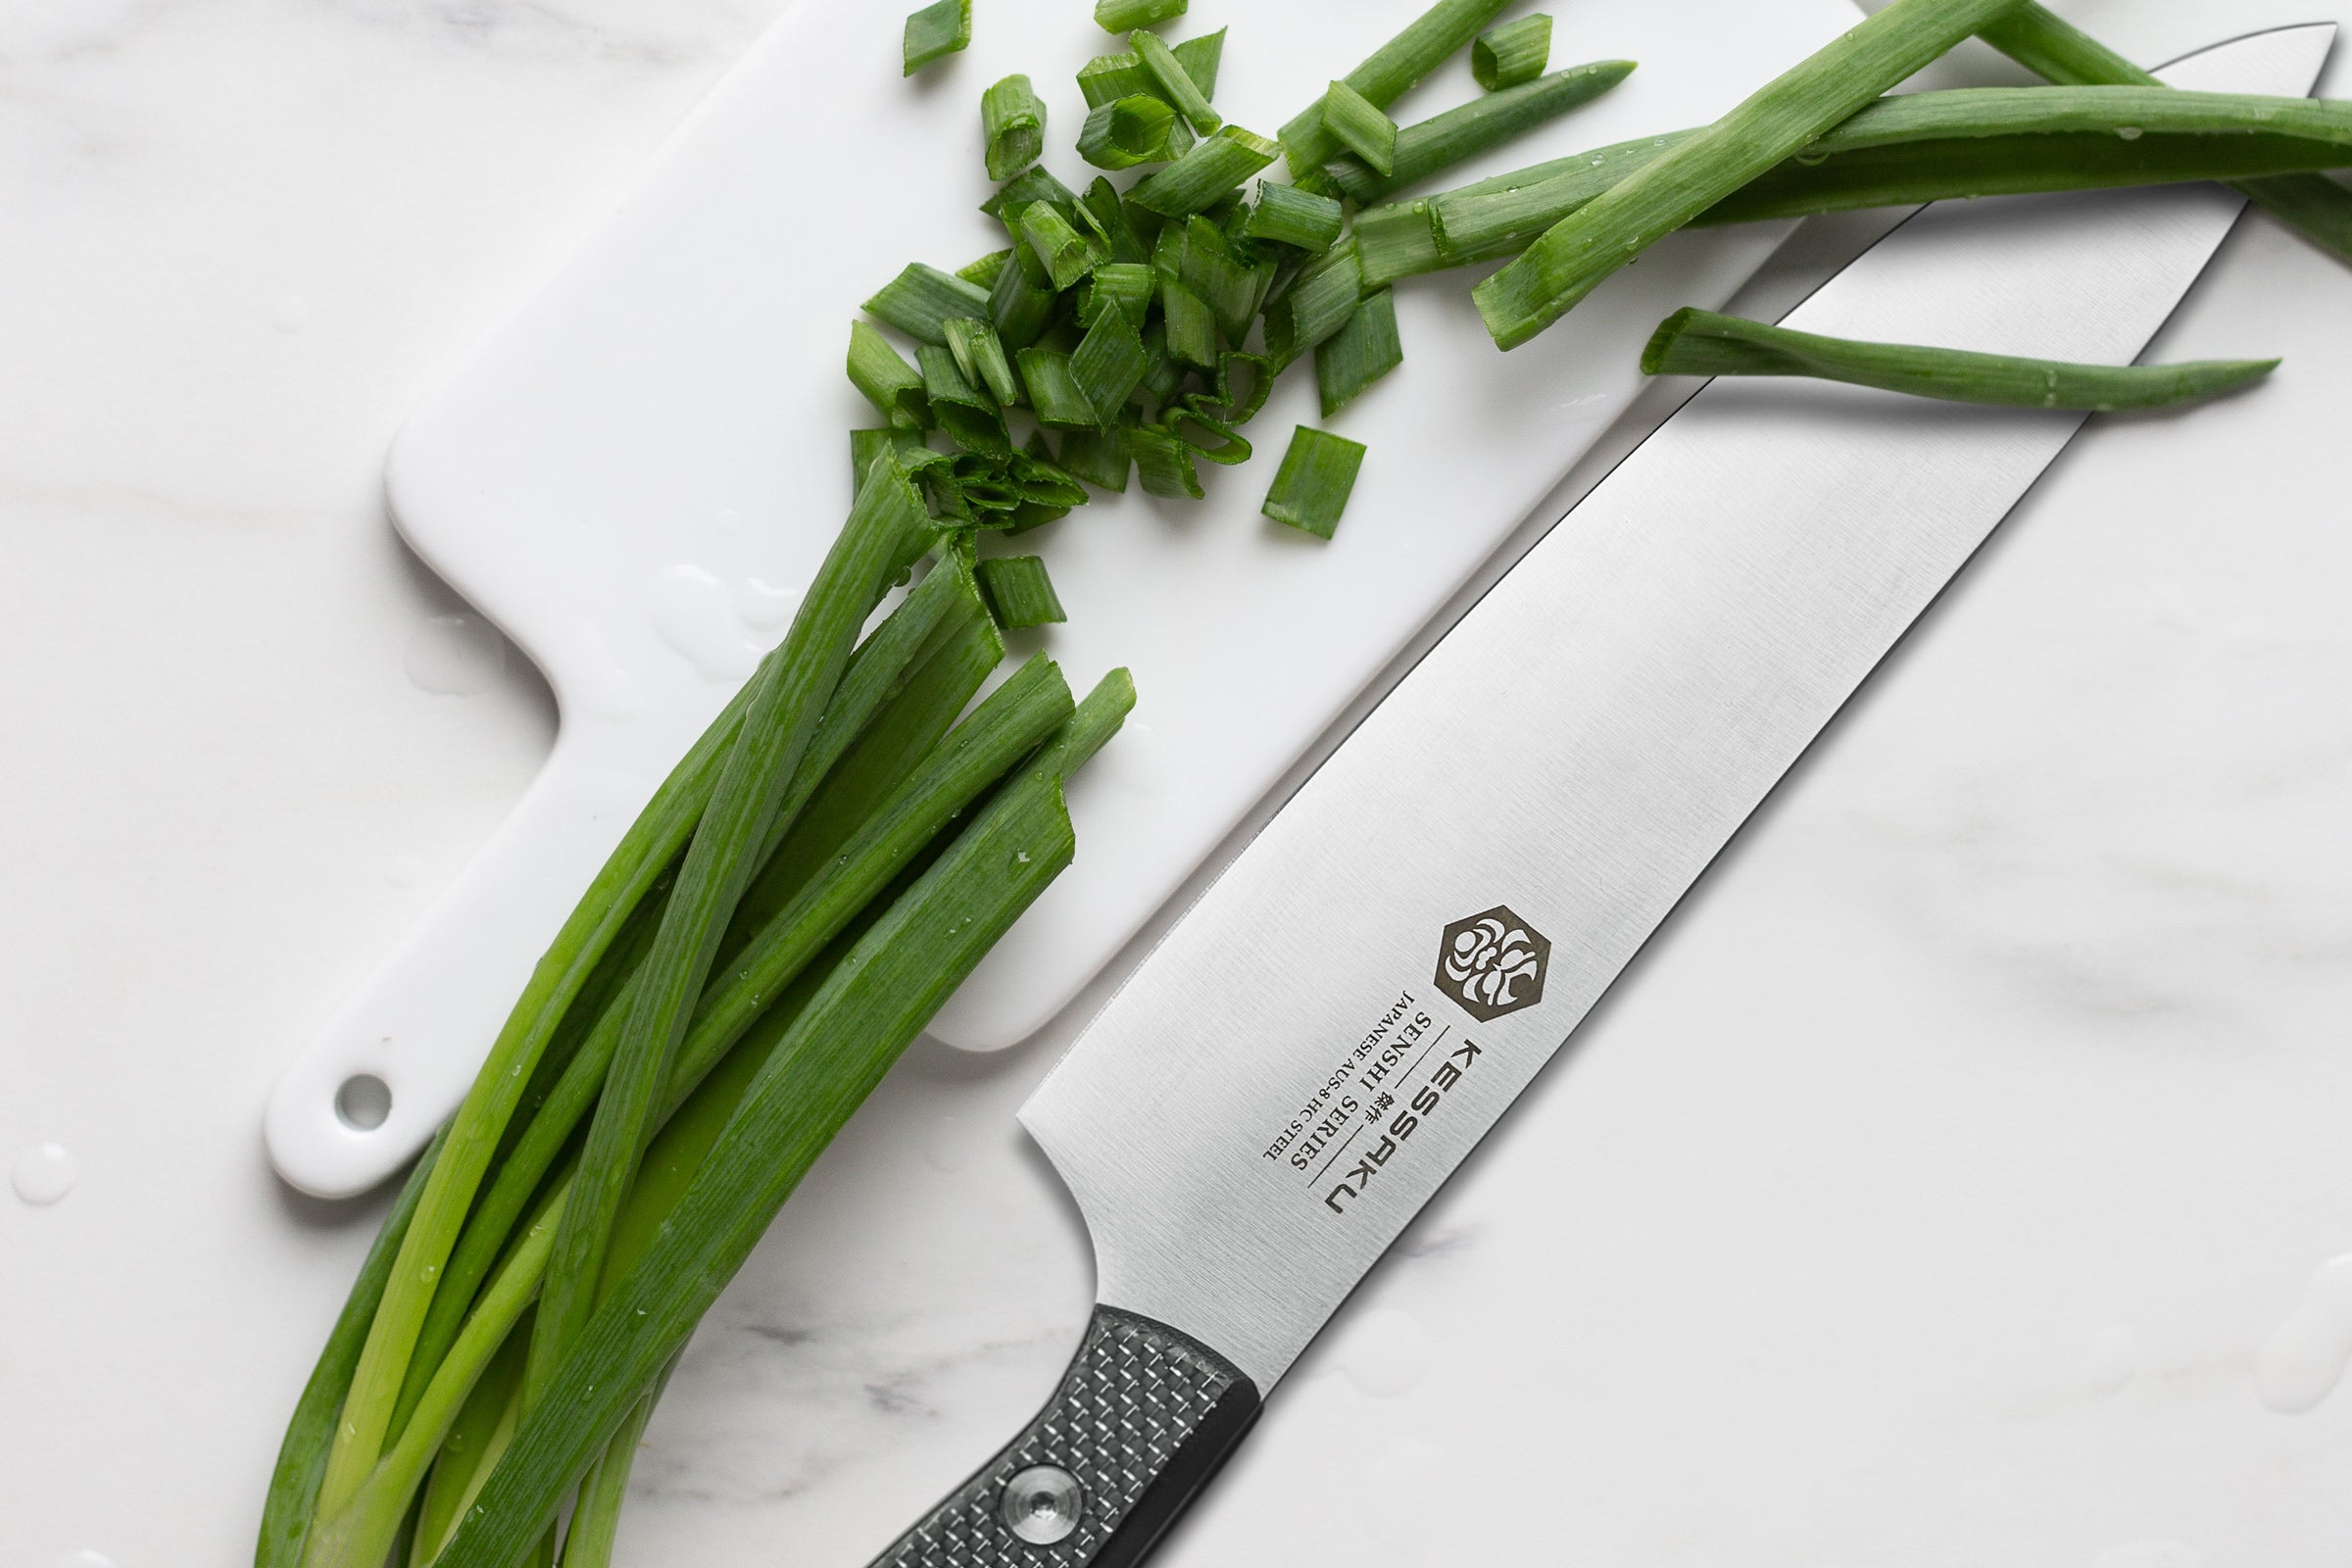 The Senshi Chef's Knife with diced green onion 